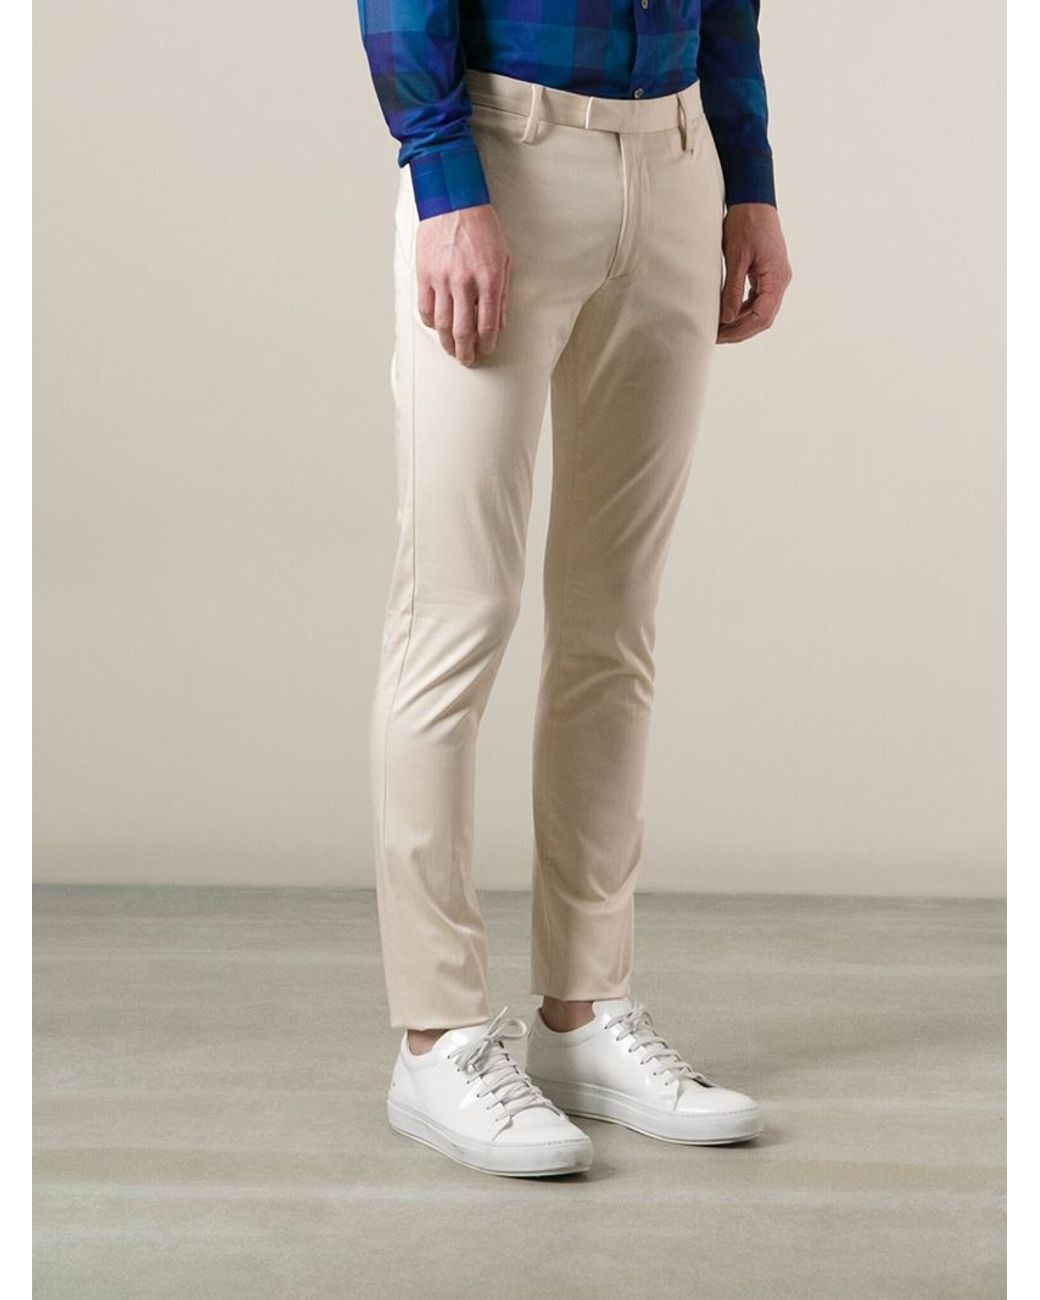 Acne Studios 'Max Satin' Chino Trousers in Natural for Men | Lyst